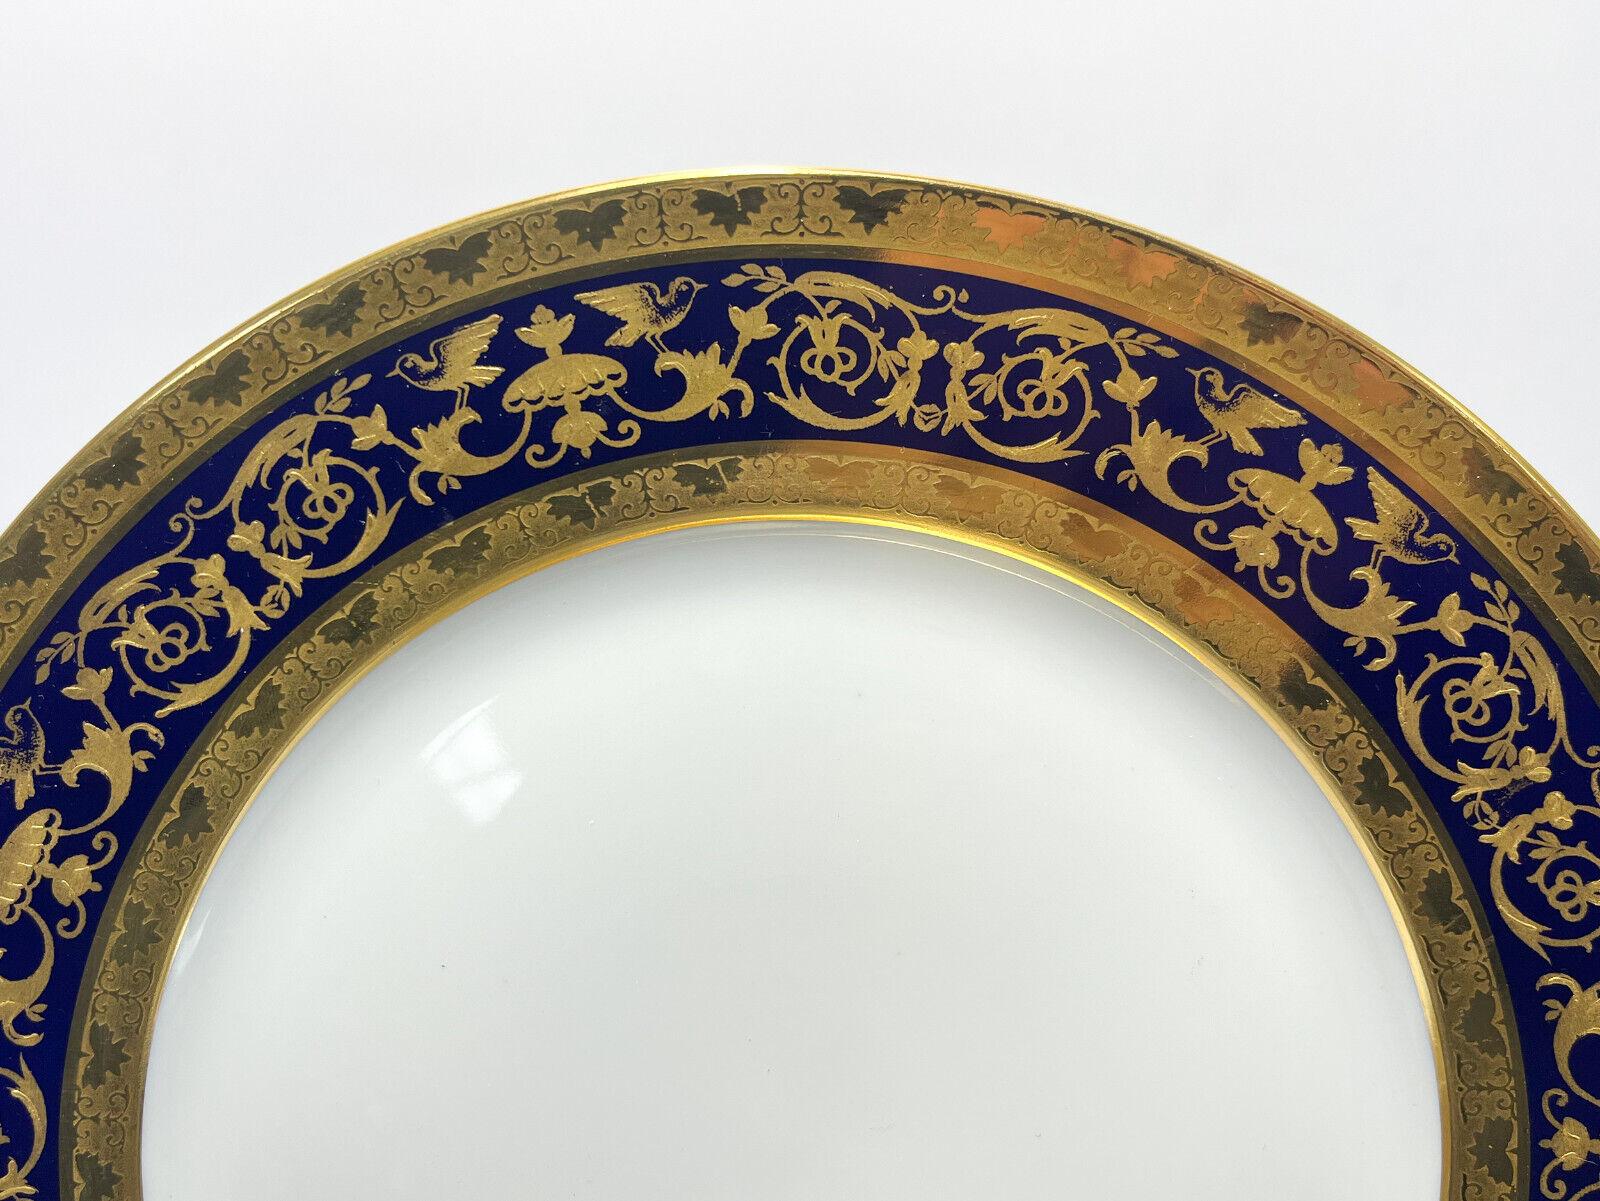  12 Limoges Raynaud Porcelain Dinner Plates in Pompei In Good Condition For Sale In Gardena, CA